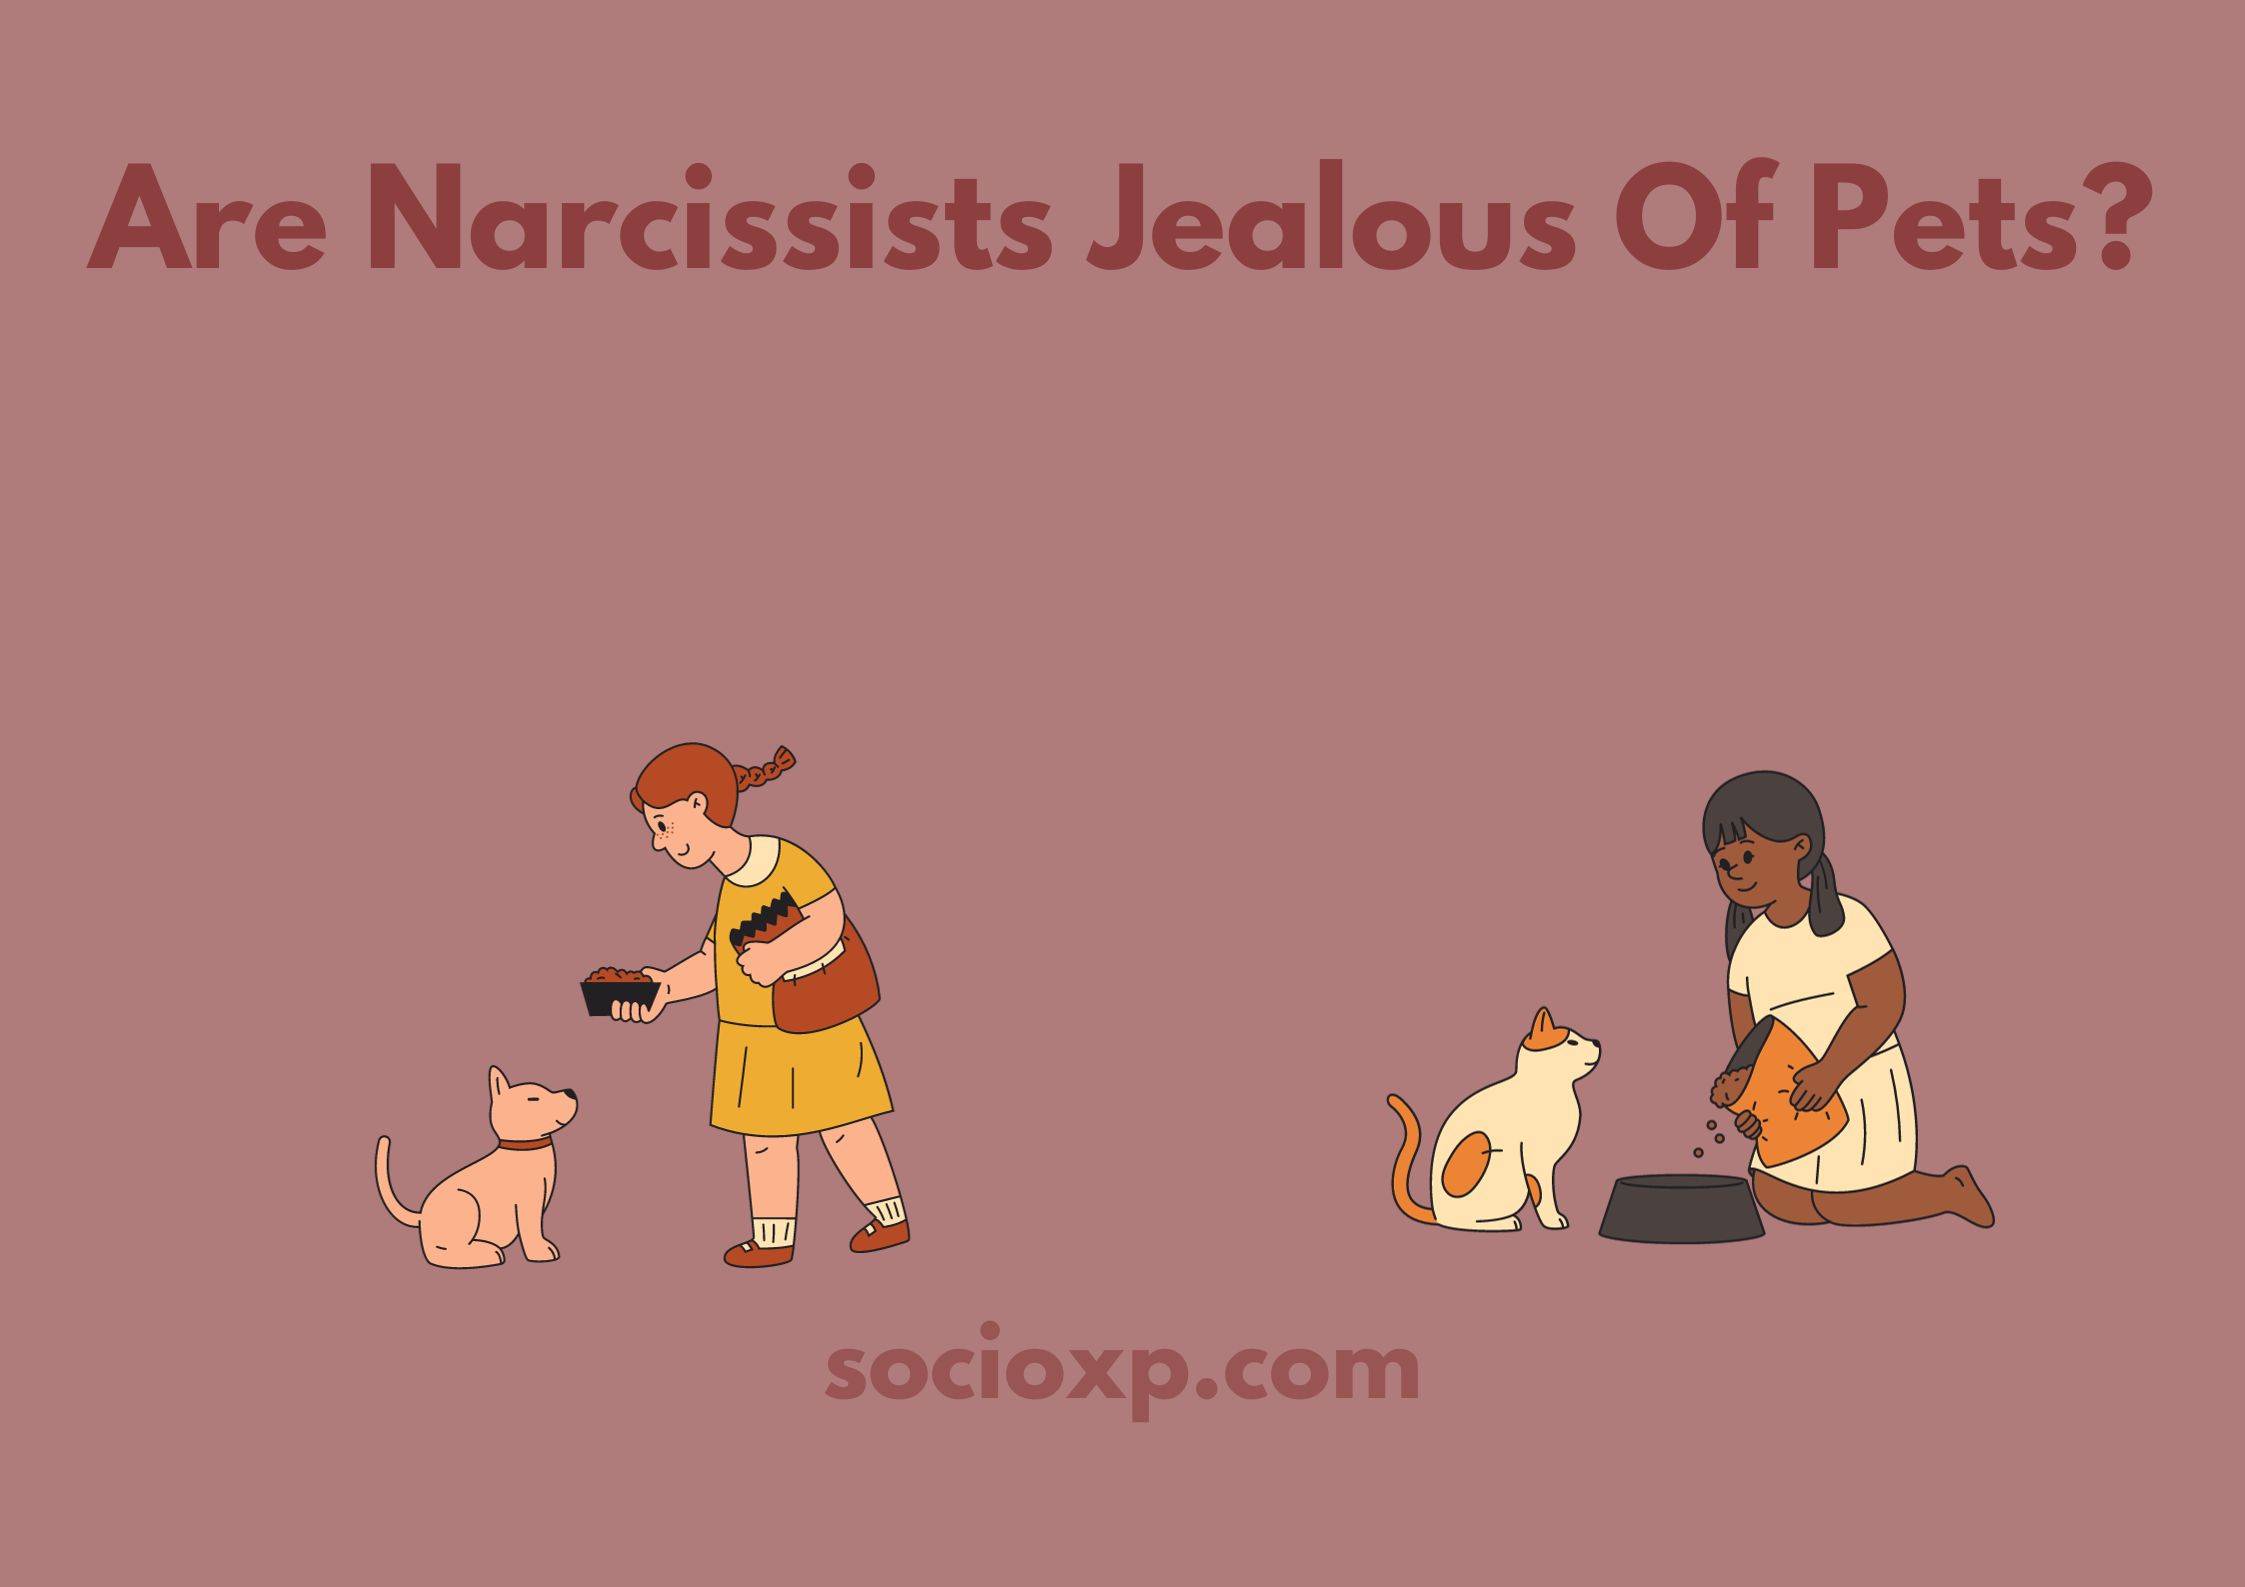 Are Narcissists Jealous Of Pets?